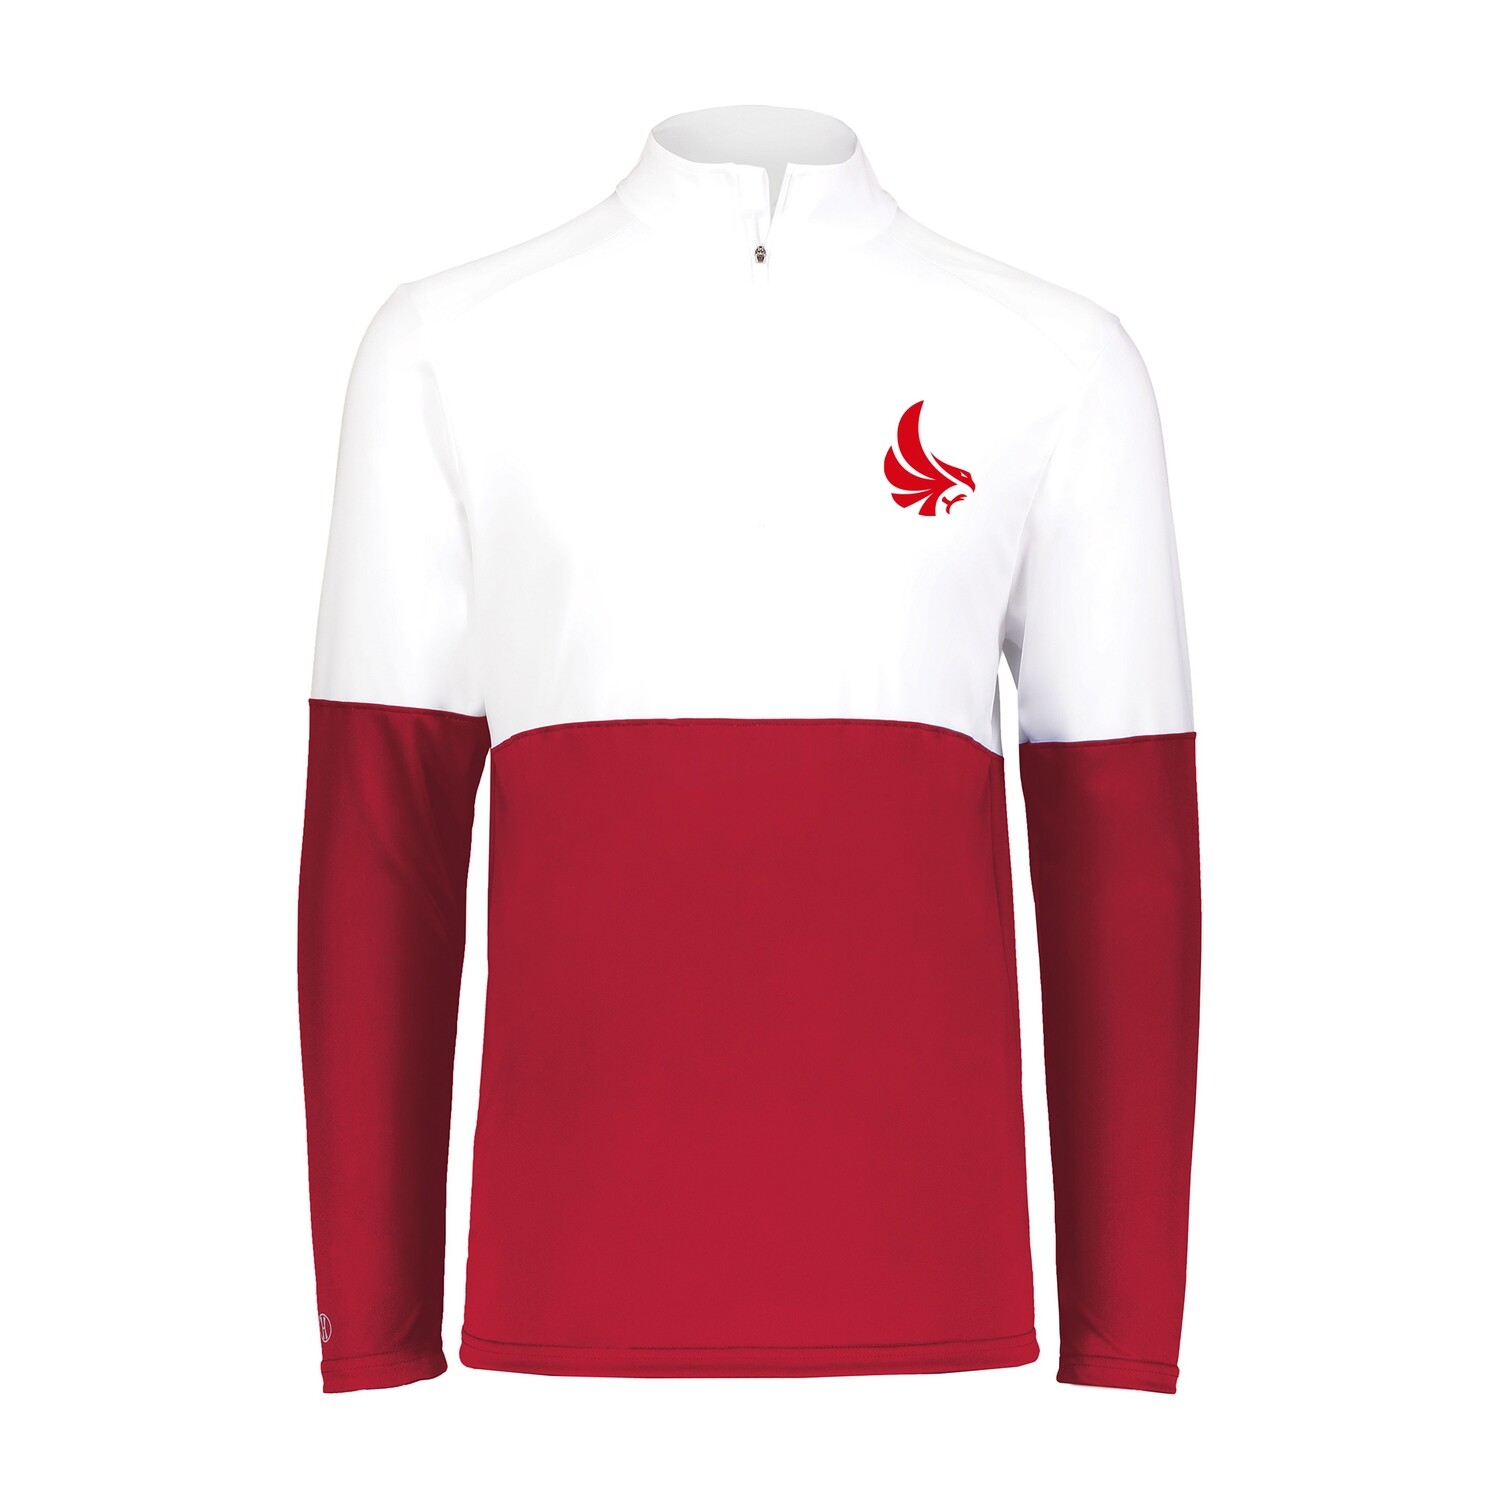 1/4 ZIP PULLOVER - WHITE/RED, SIZE:: SMALL